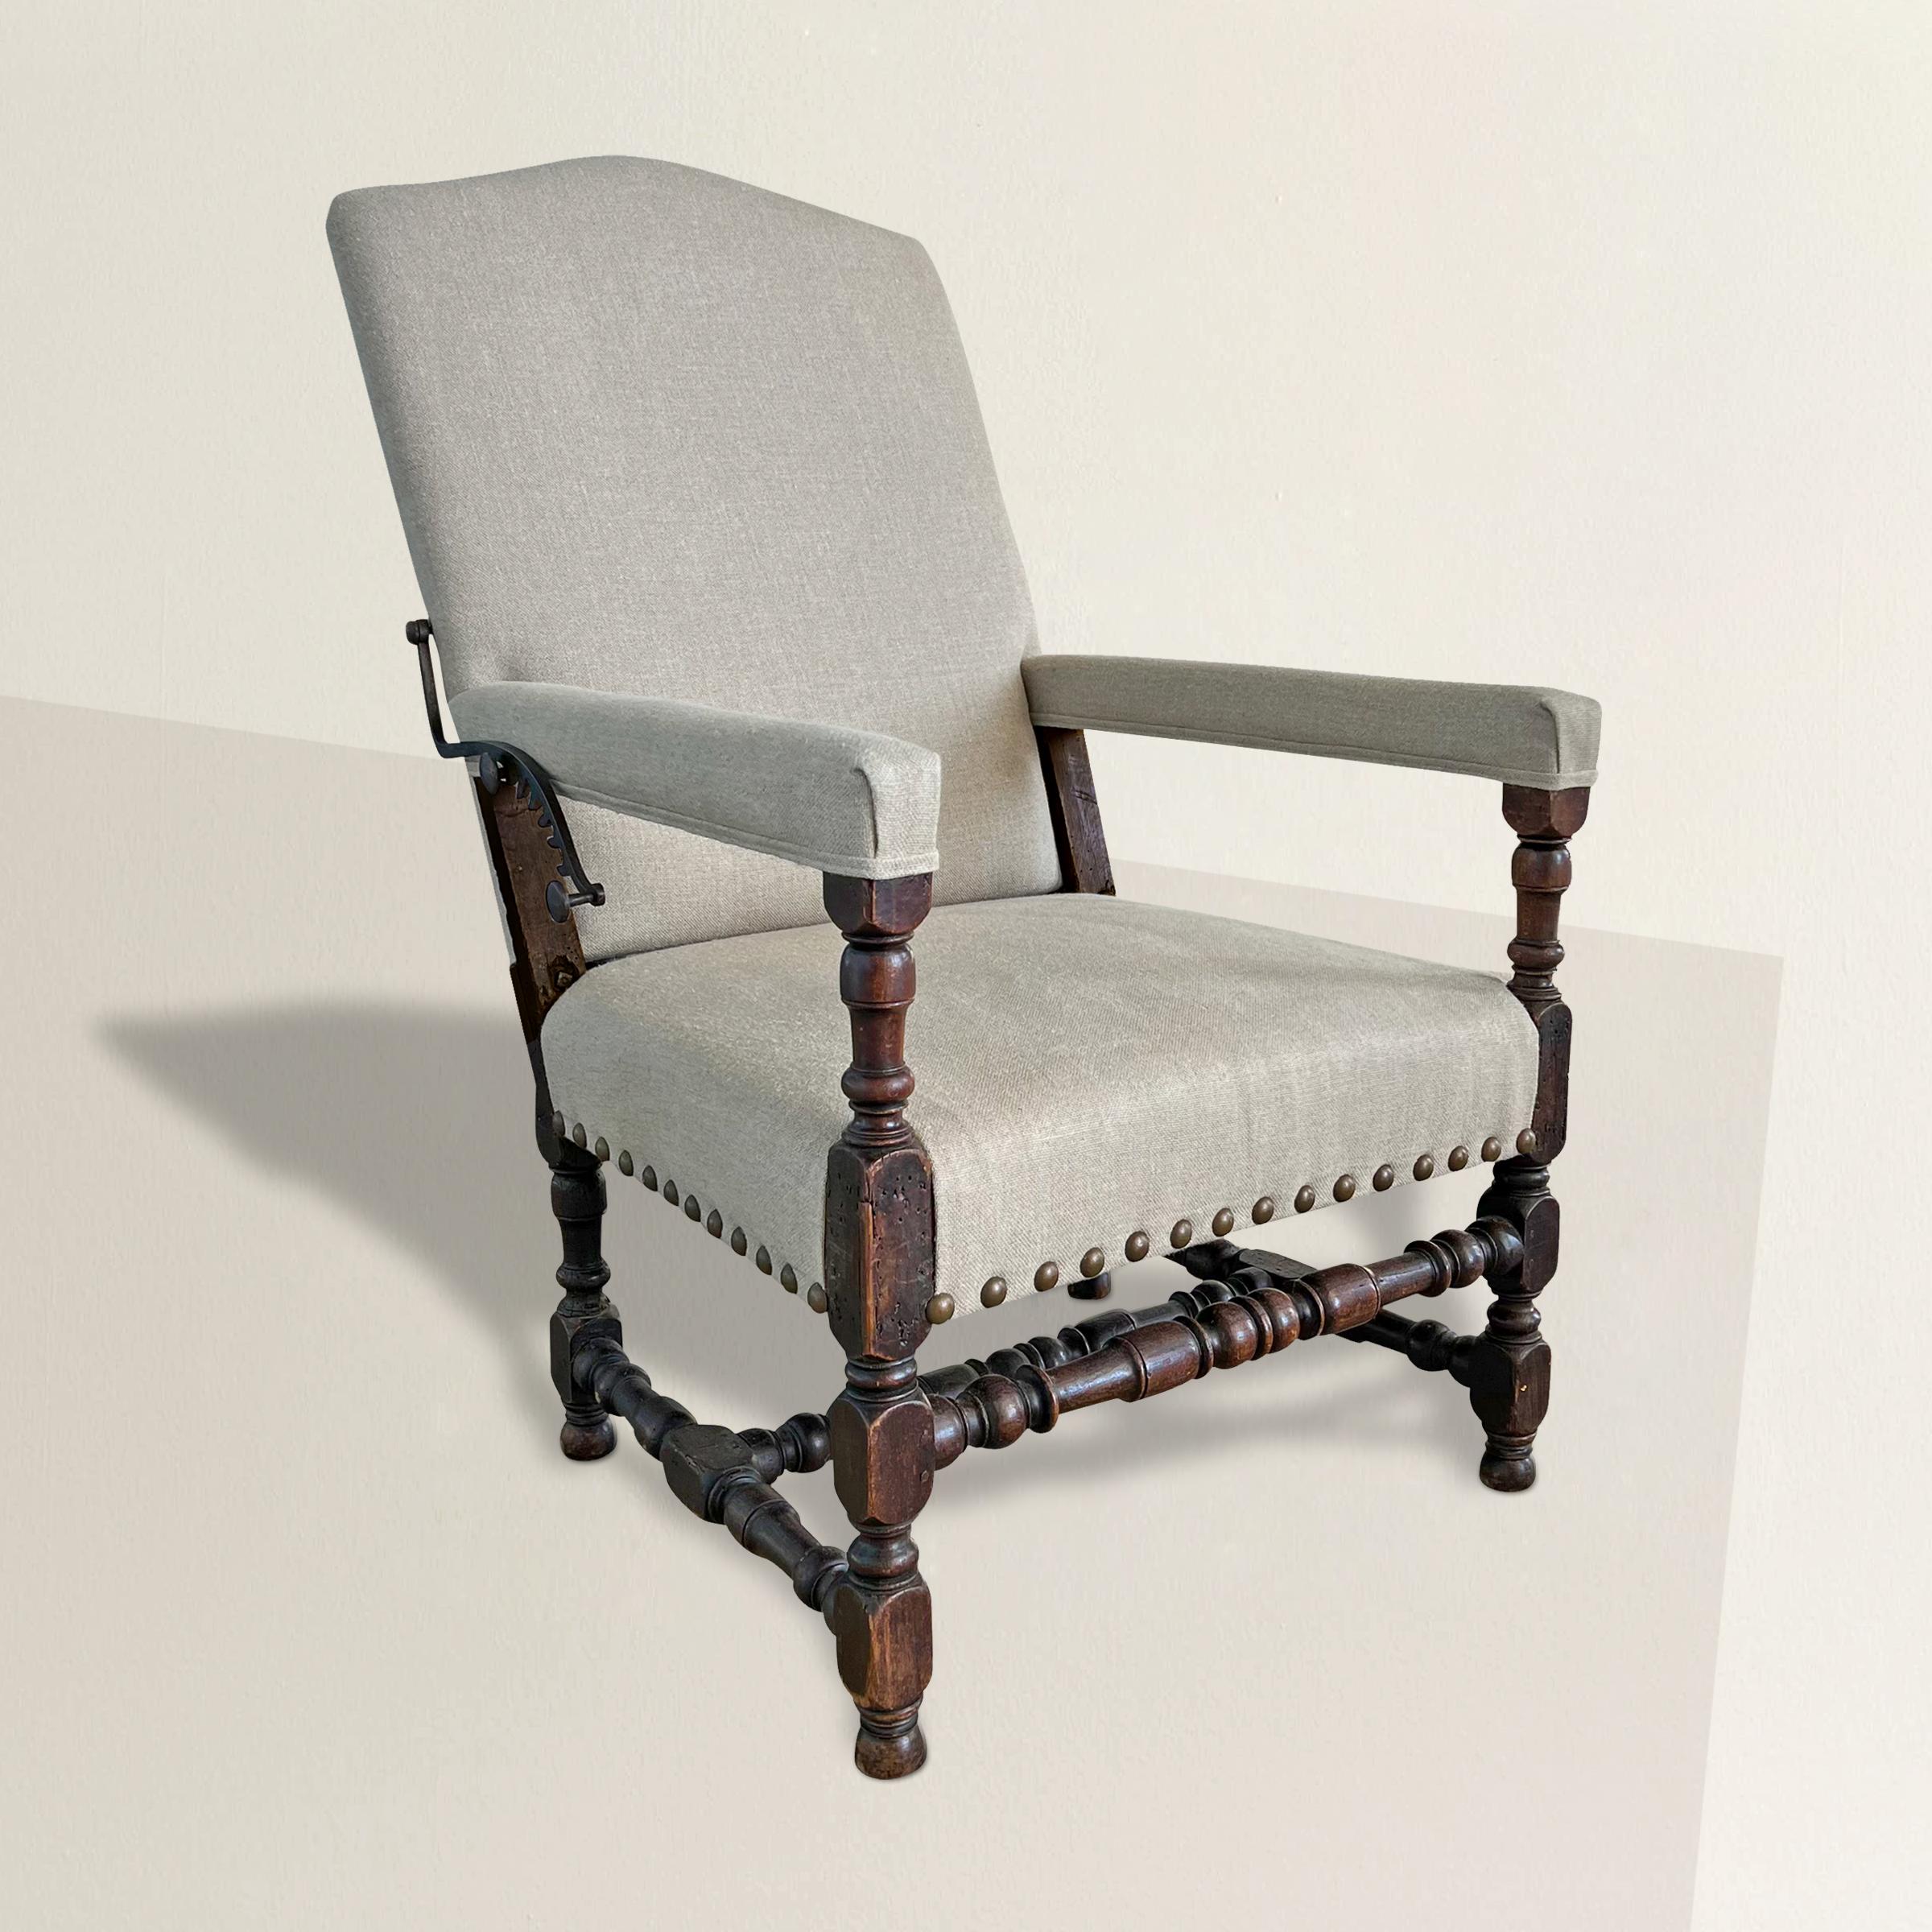 This 17th century French walnut ratchet chair is a magnificent embodiment of historical design ingenuity. Crafted with a frame comprised of wonderfully turned walnut styles, it represents the rustic elegance of French provincial furniture from this